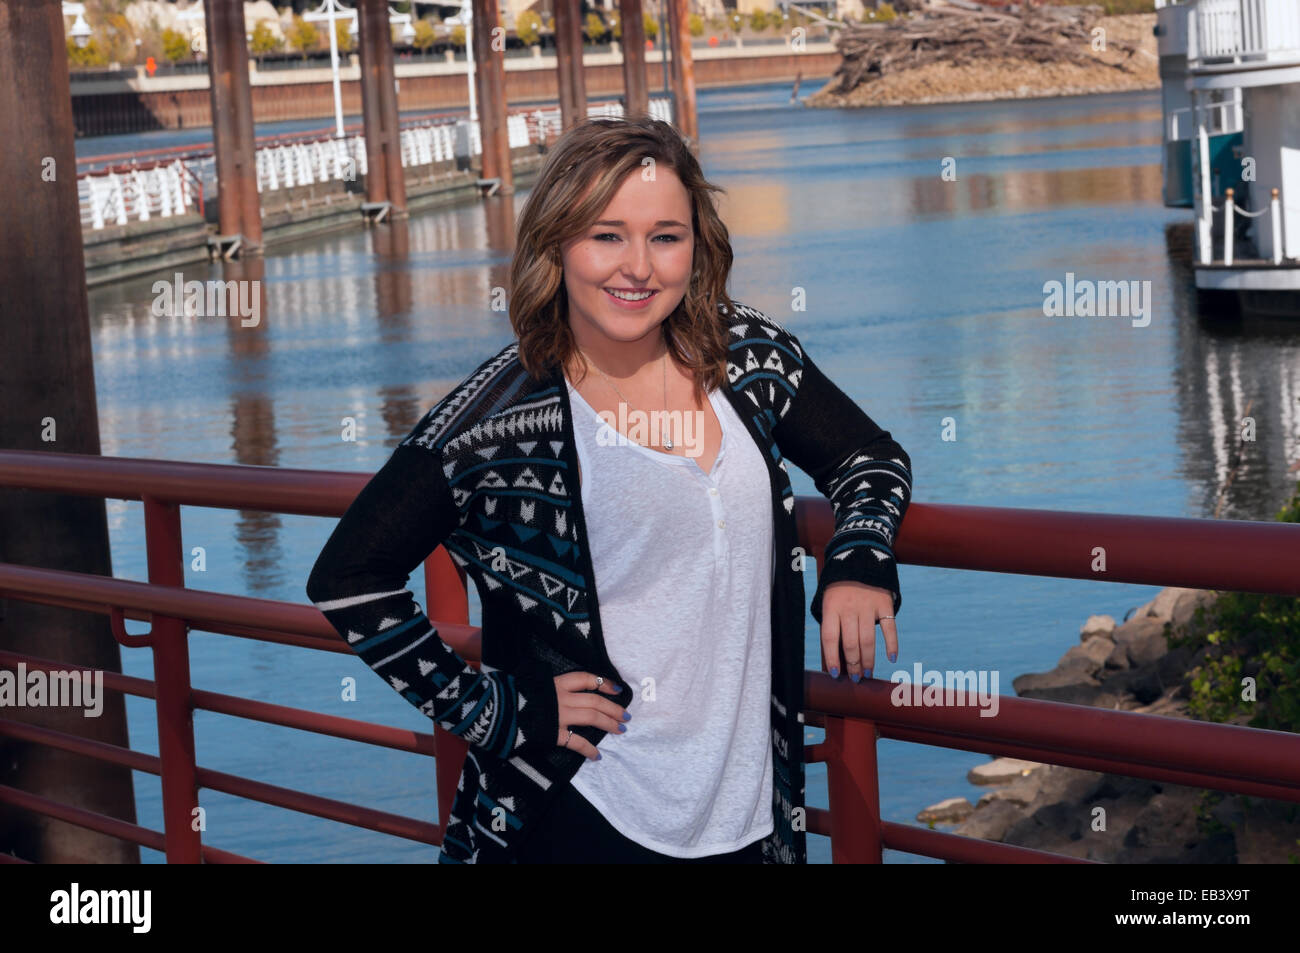 Outdoor portrait of young teen female smiling Mississippi River and downtown saint paul in background Stock Photo